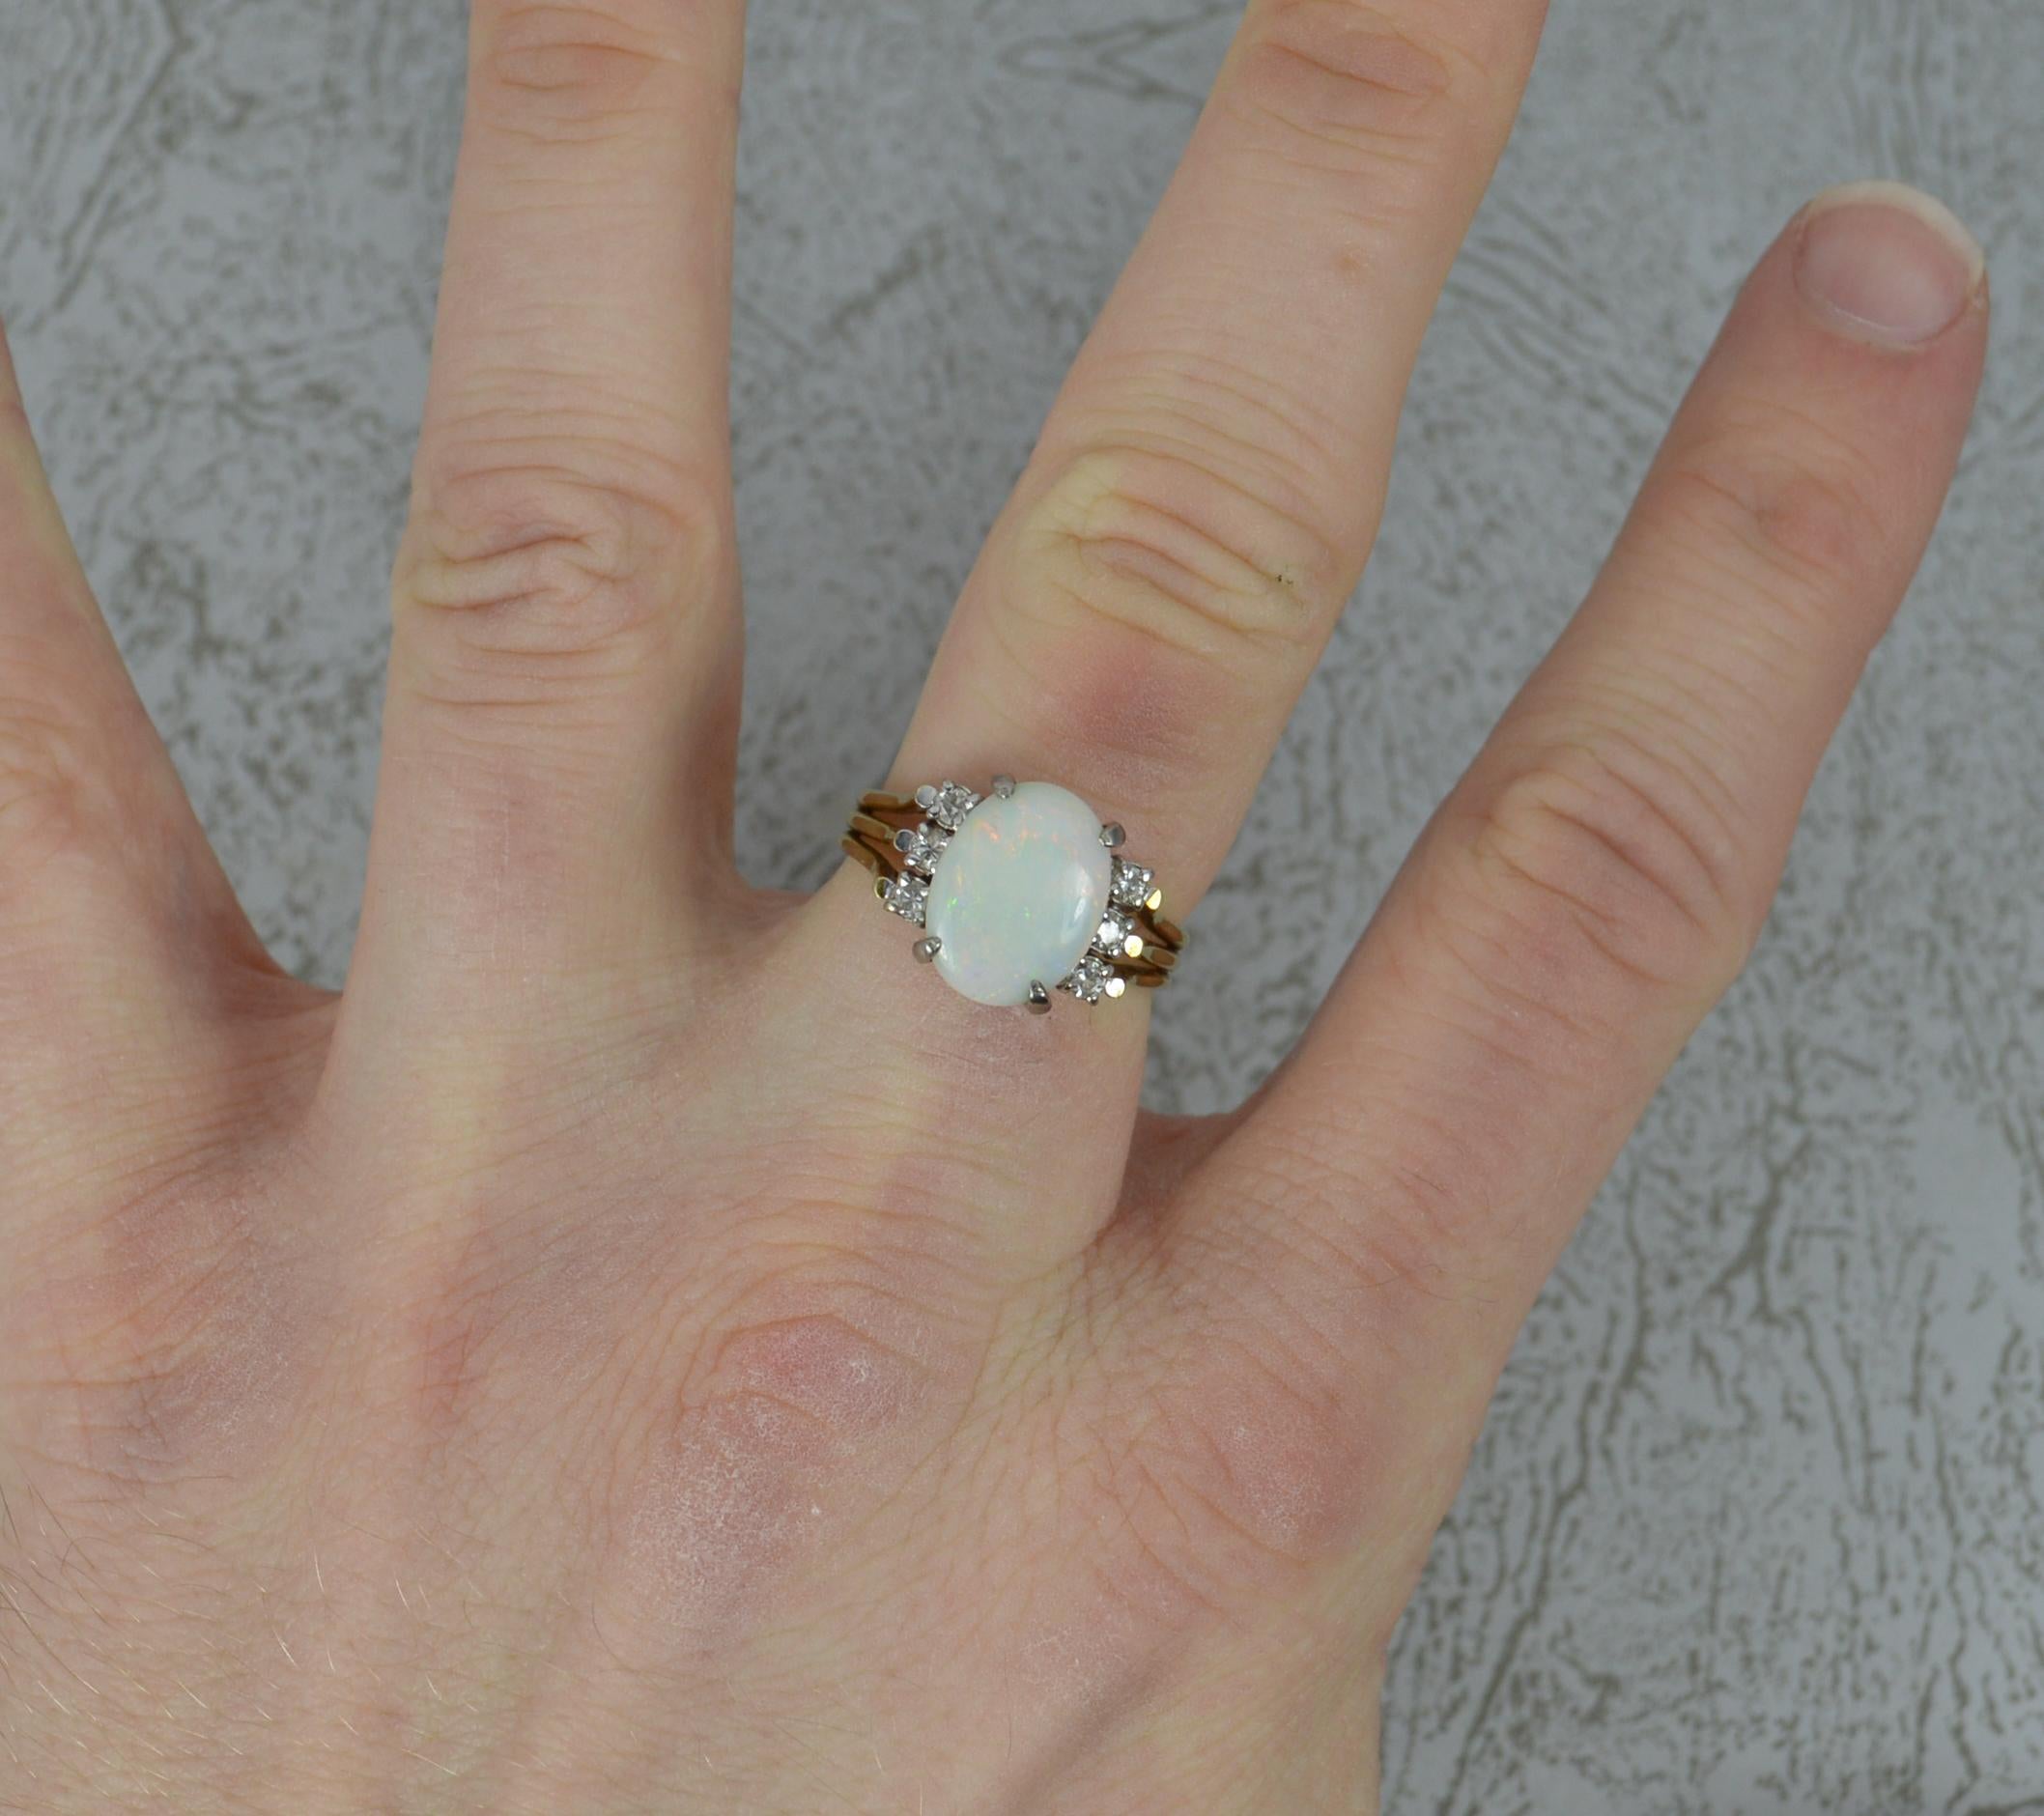 A fine quality opal and diamond 14ct gold ring.
Set with an oval opal to centre in four claw head. 11.5mm x 8.7mm with three round cut diamonds to each side.

Condition ; Very good. Clean, solid band. Well set stones. Issue free. Please view